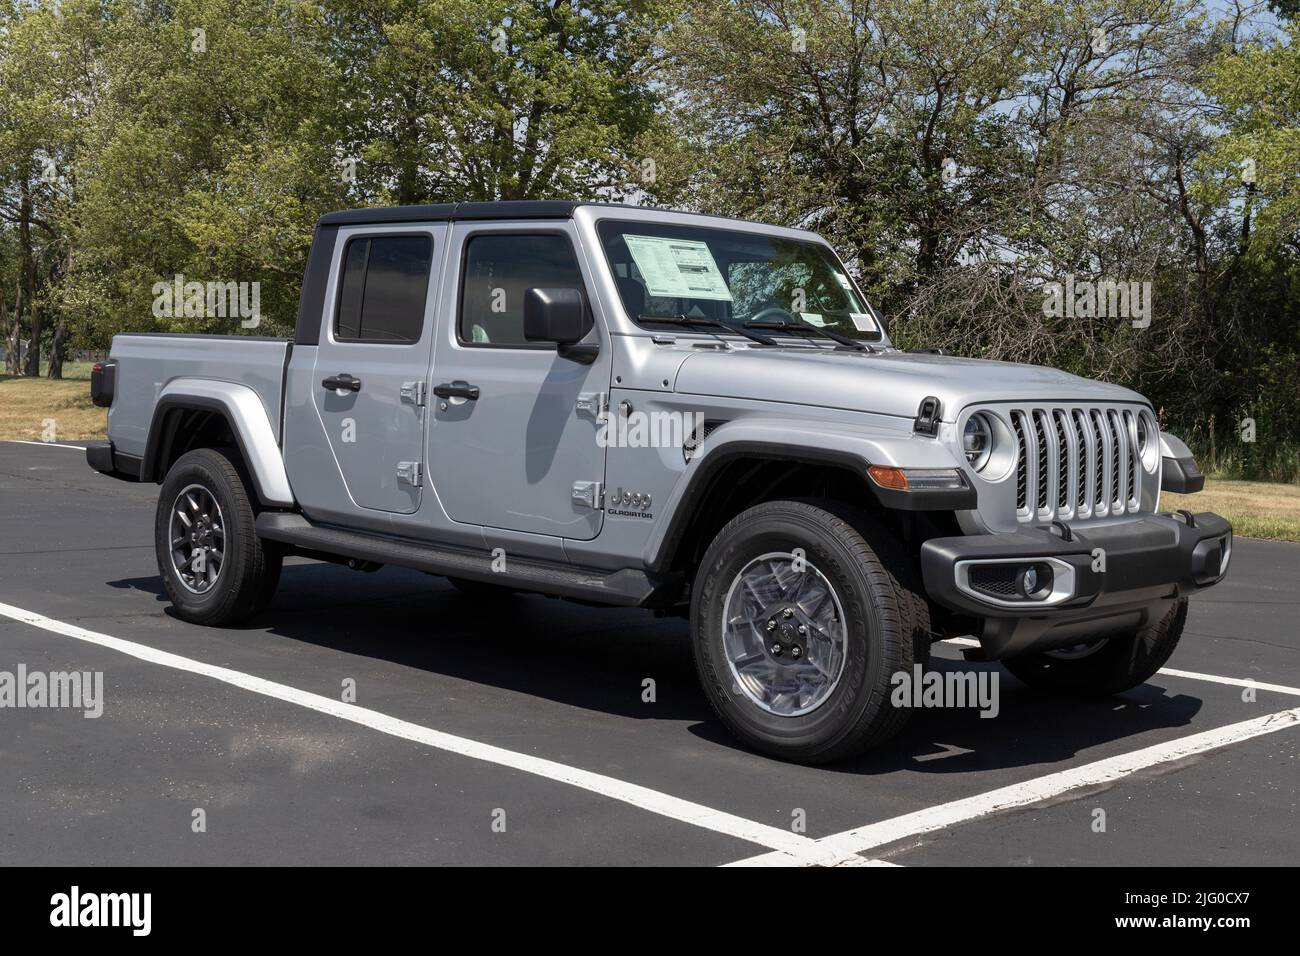 Kokomo - Circa July 2022: Jeep Gladiator display at a Stellantis dealer. The Jeep Gladiator models include the Sport, Willys, Rubicon and Mojave. Stock Photo